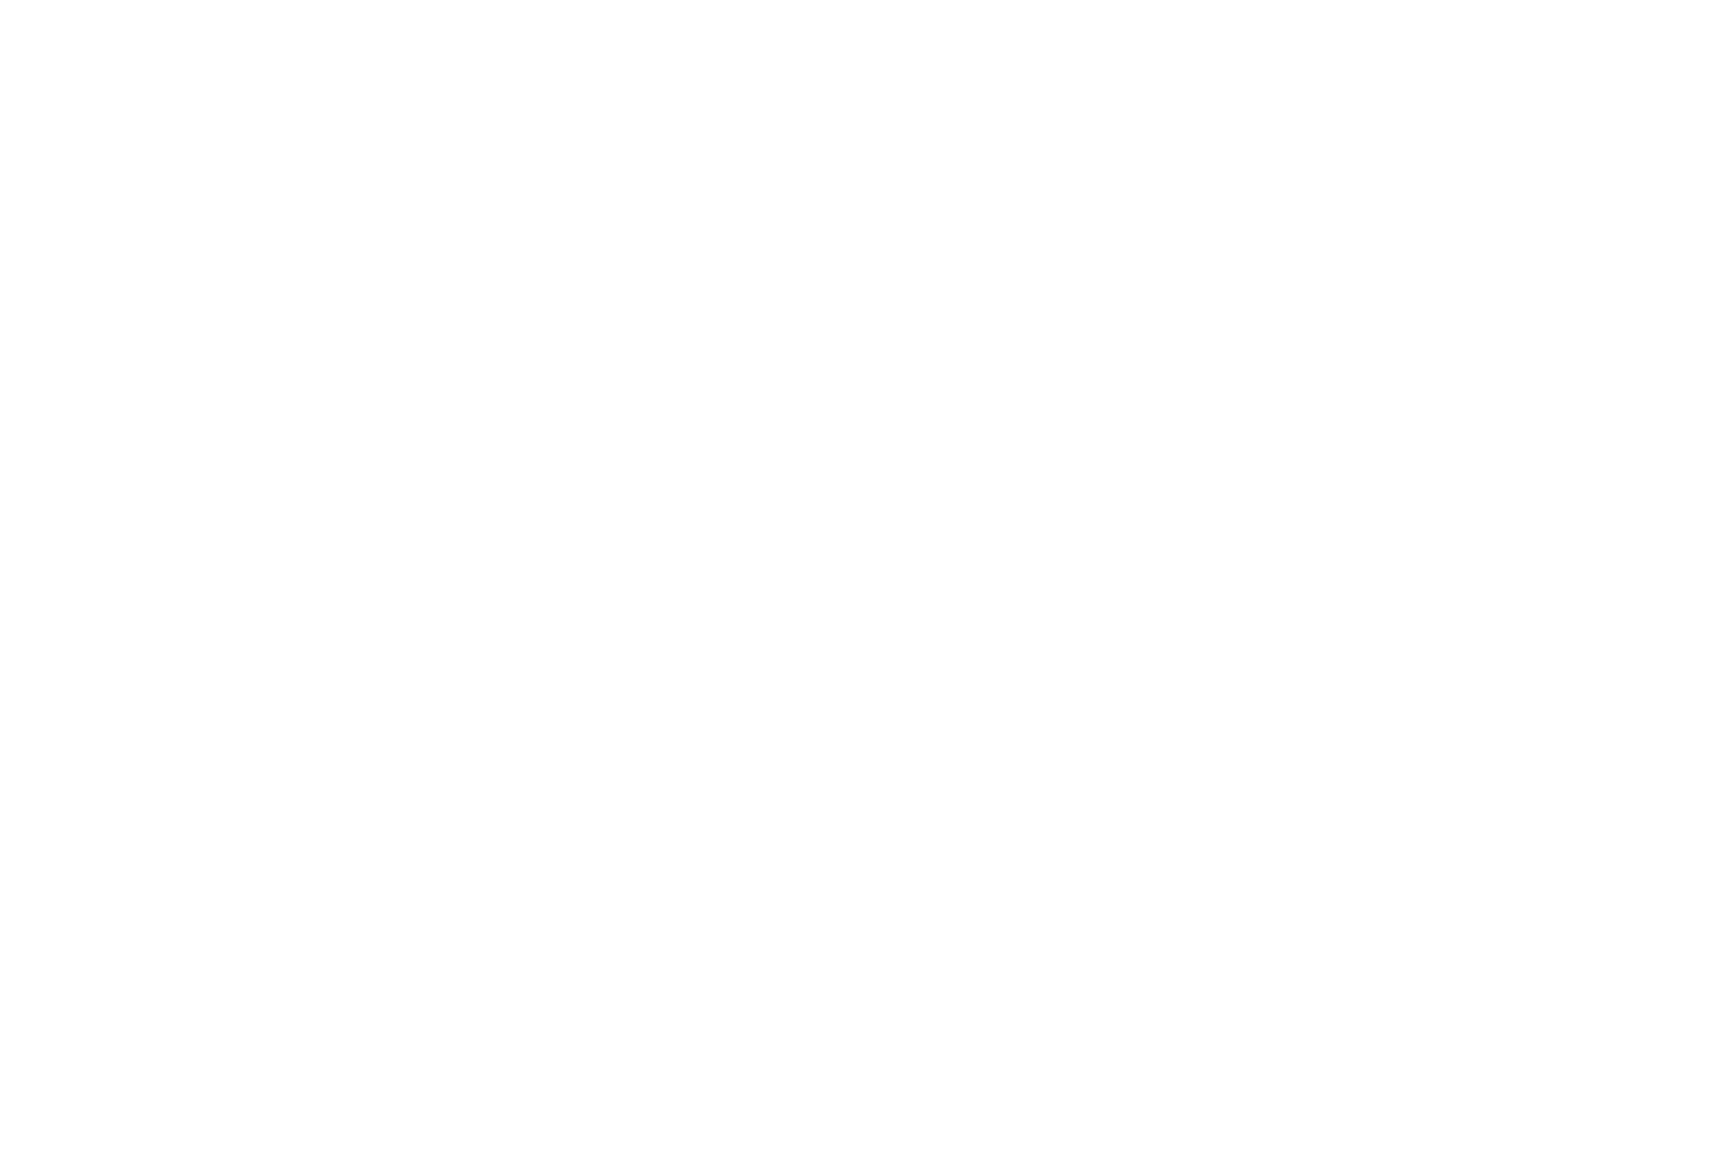 Winner - Best Young Actress - New York Cinematography AWARDS NYCA - 2023 (1)